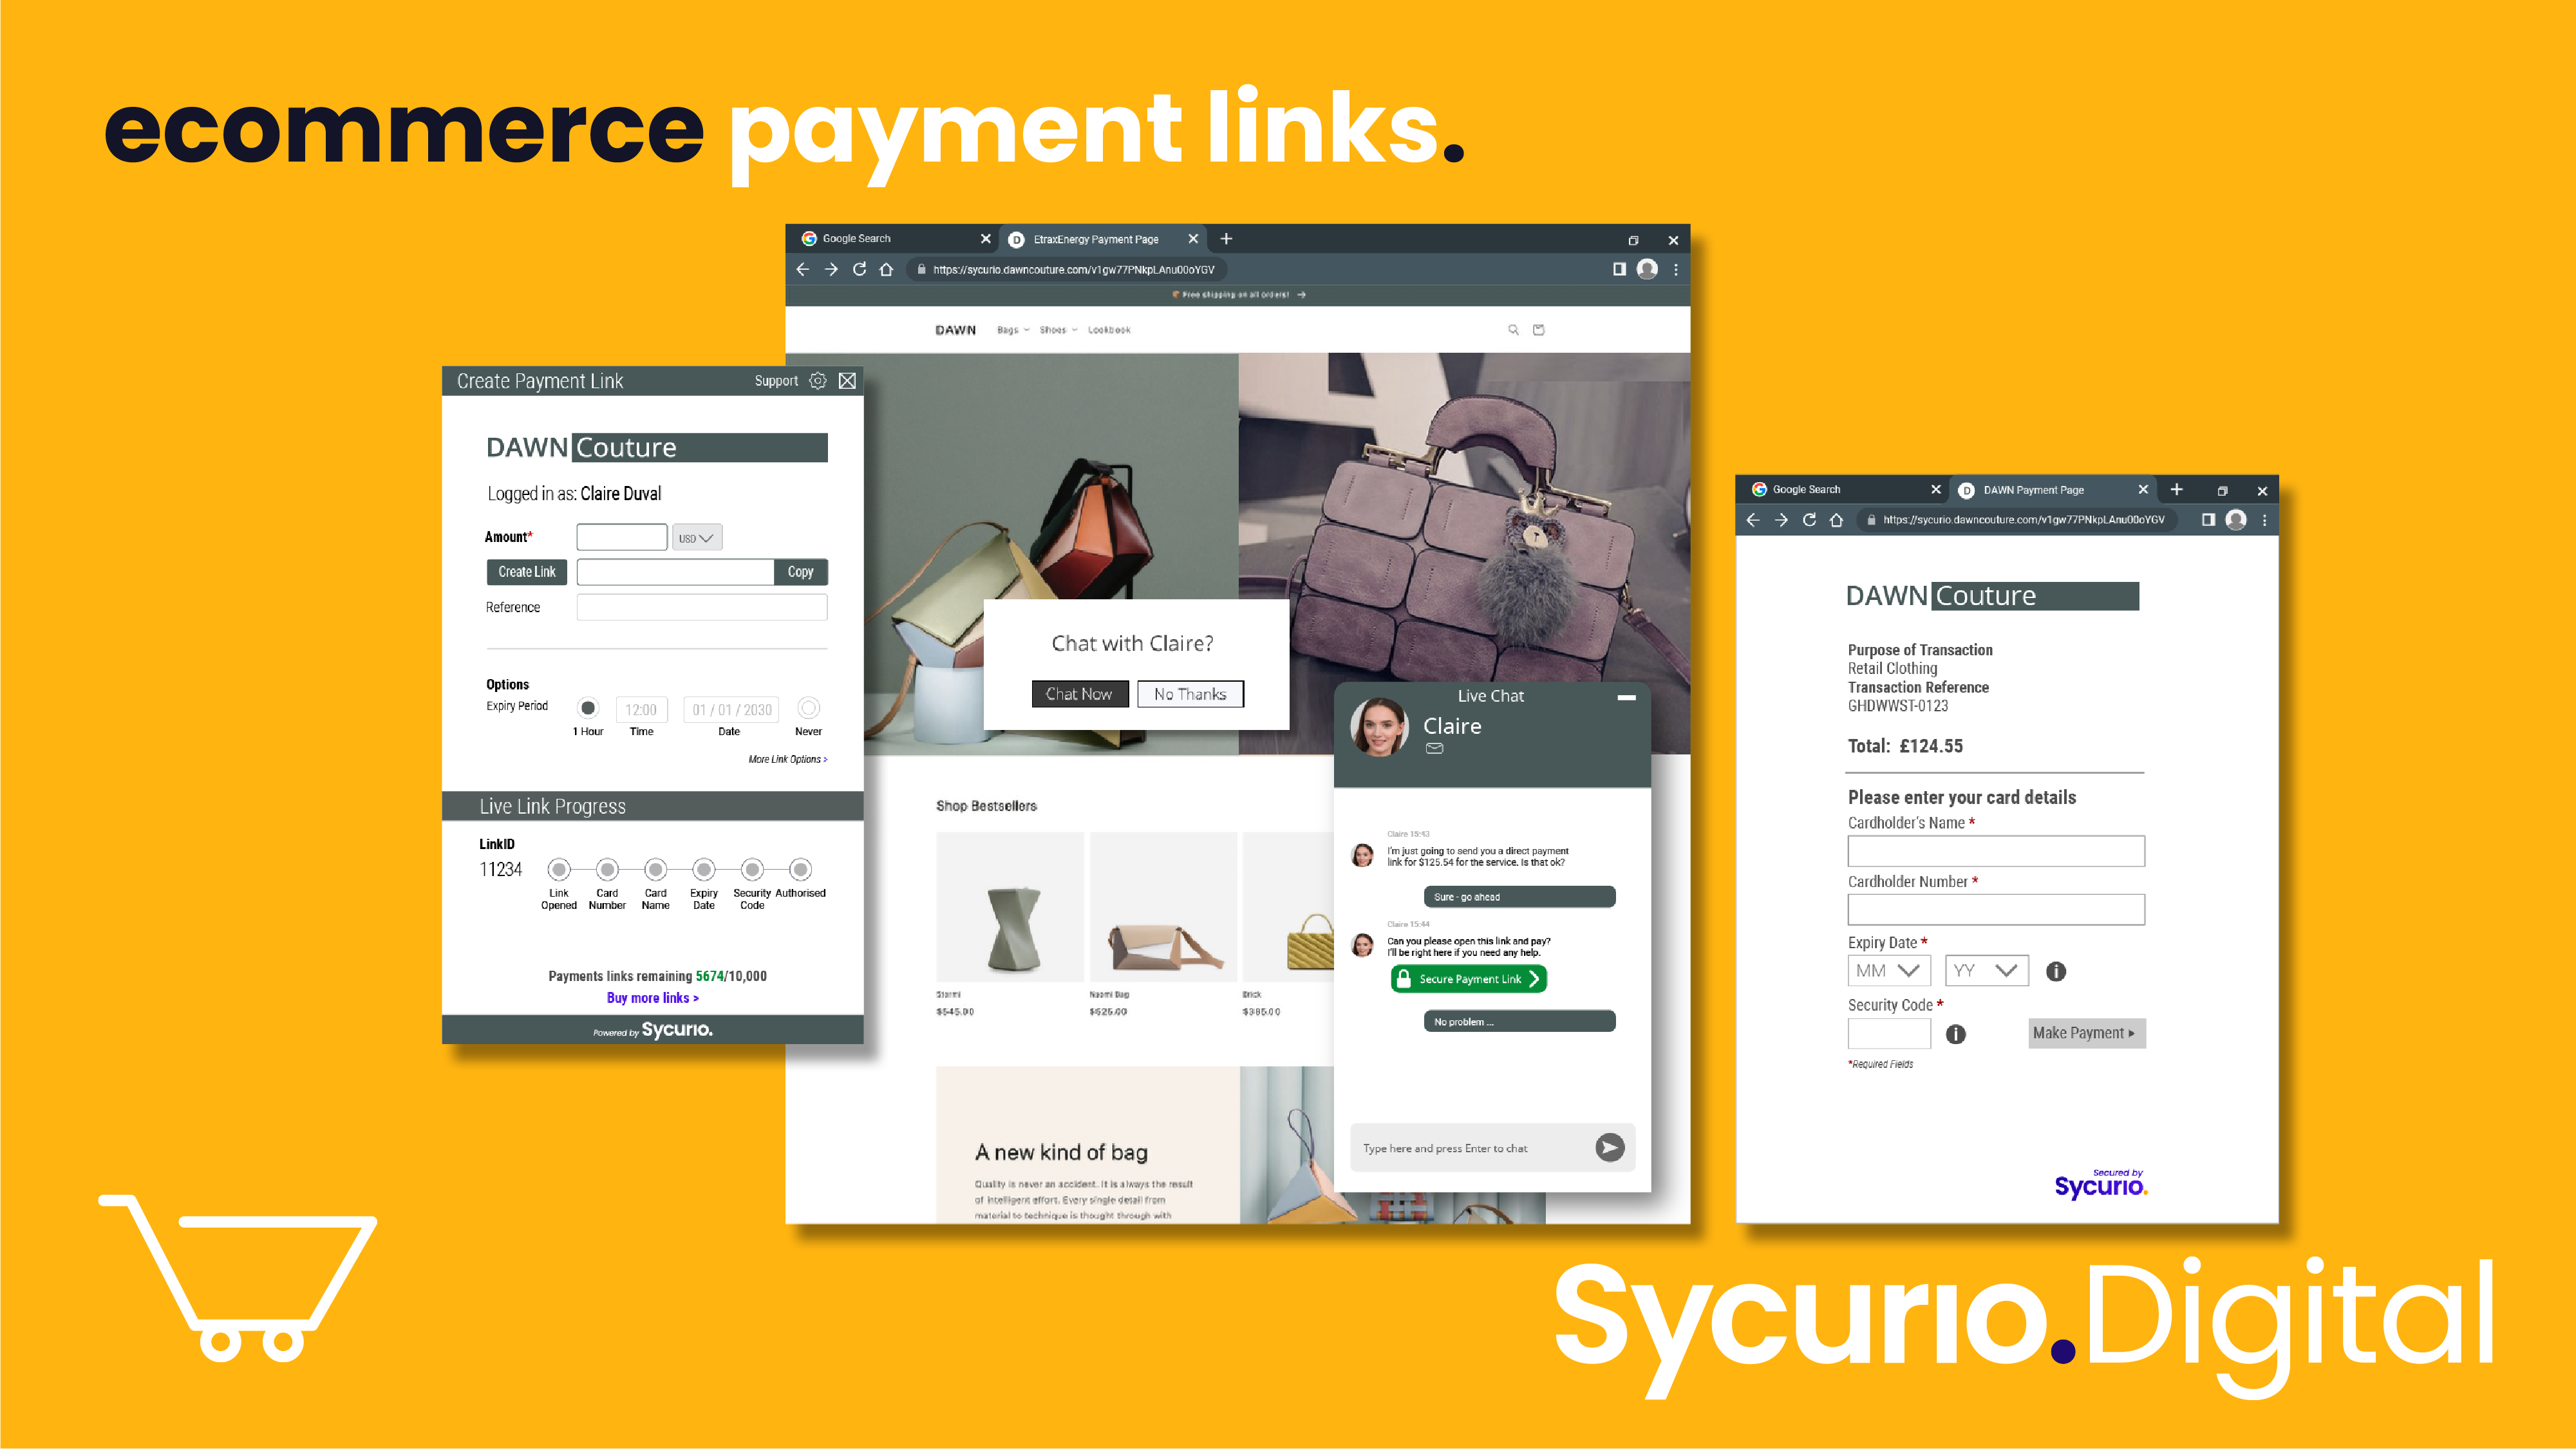 Sycurio.Digital Omnichannel Payment Links payment link integrations